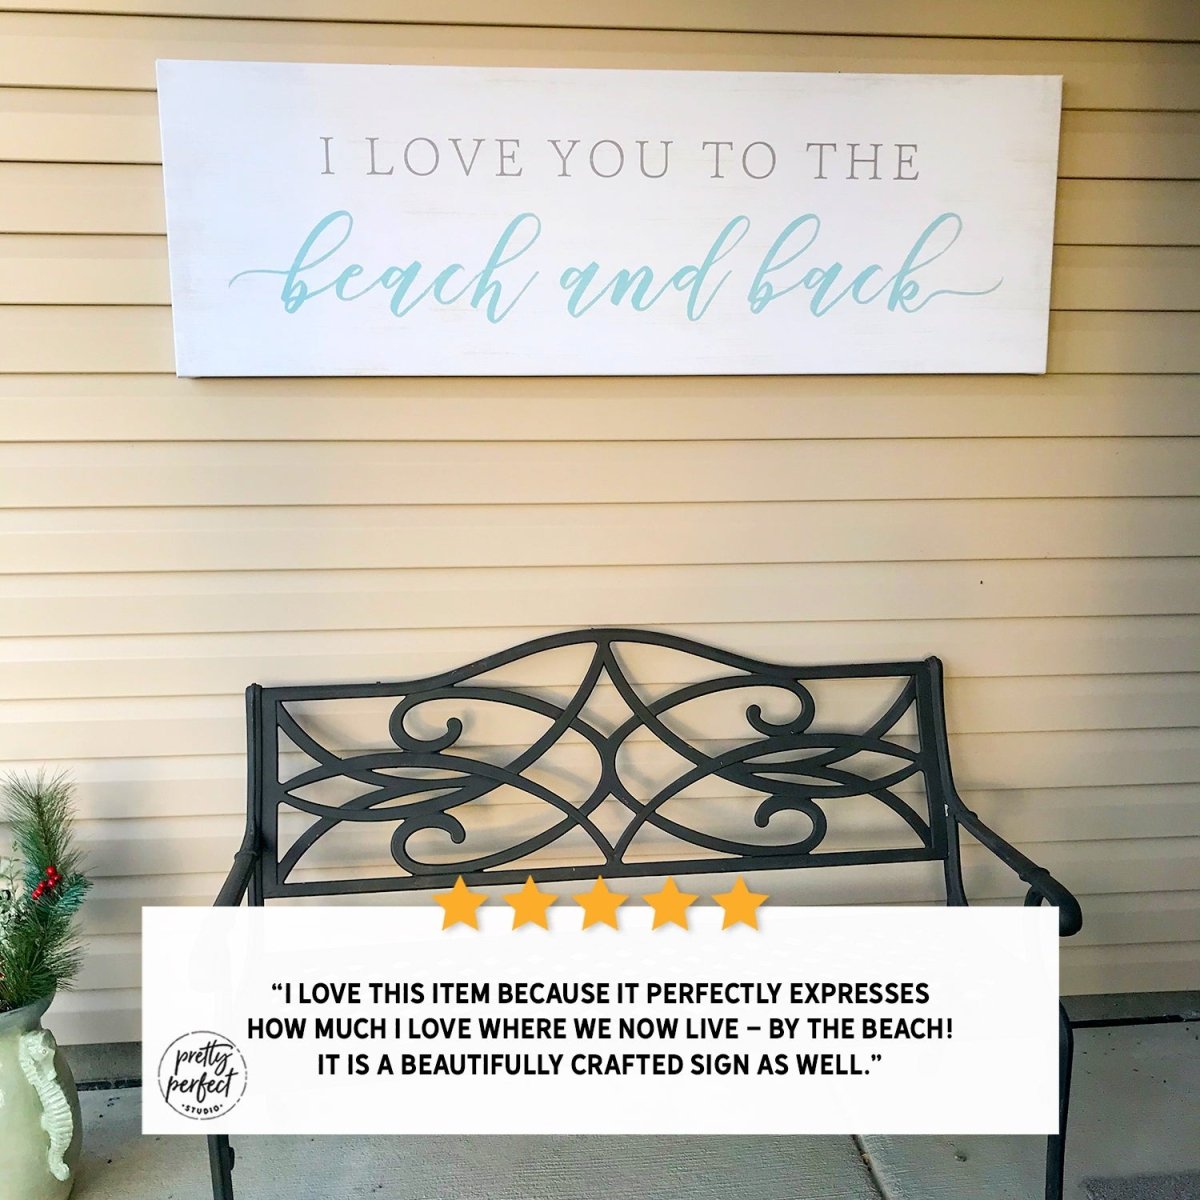 Customer product review for i love you to the beach and back sign by Pretty Perfect Studio